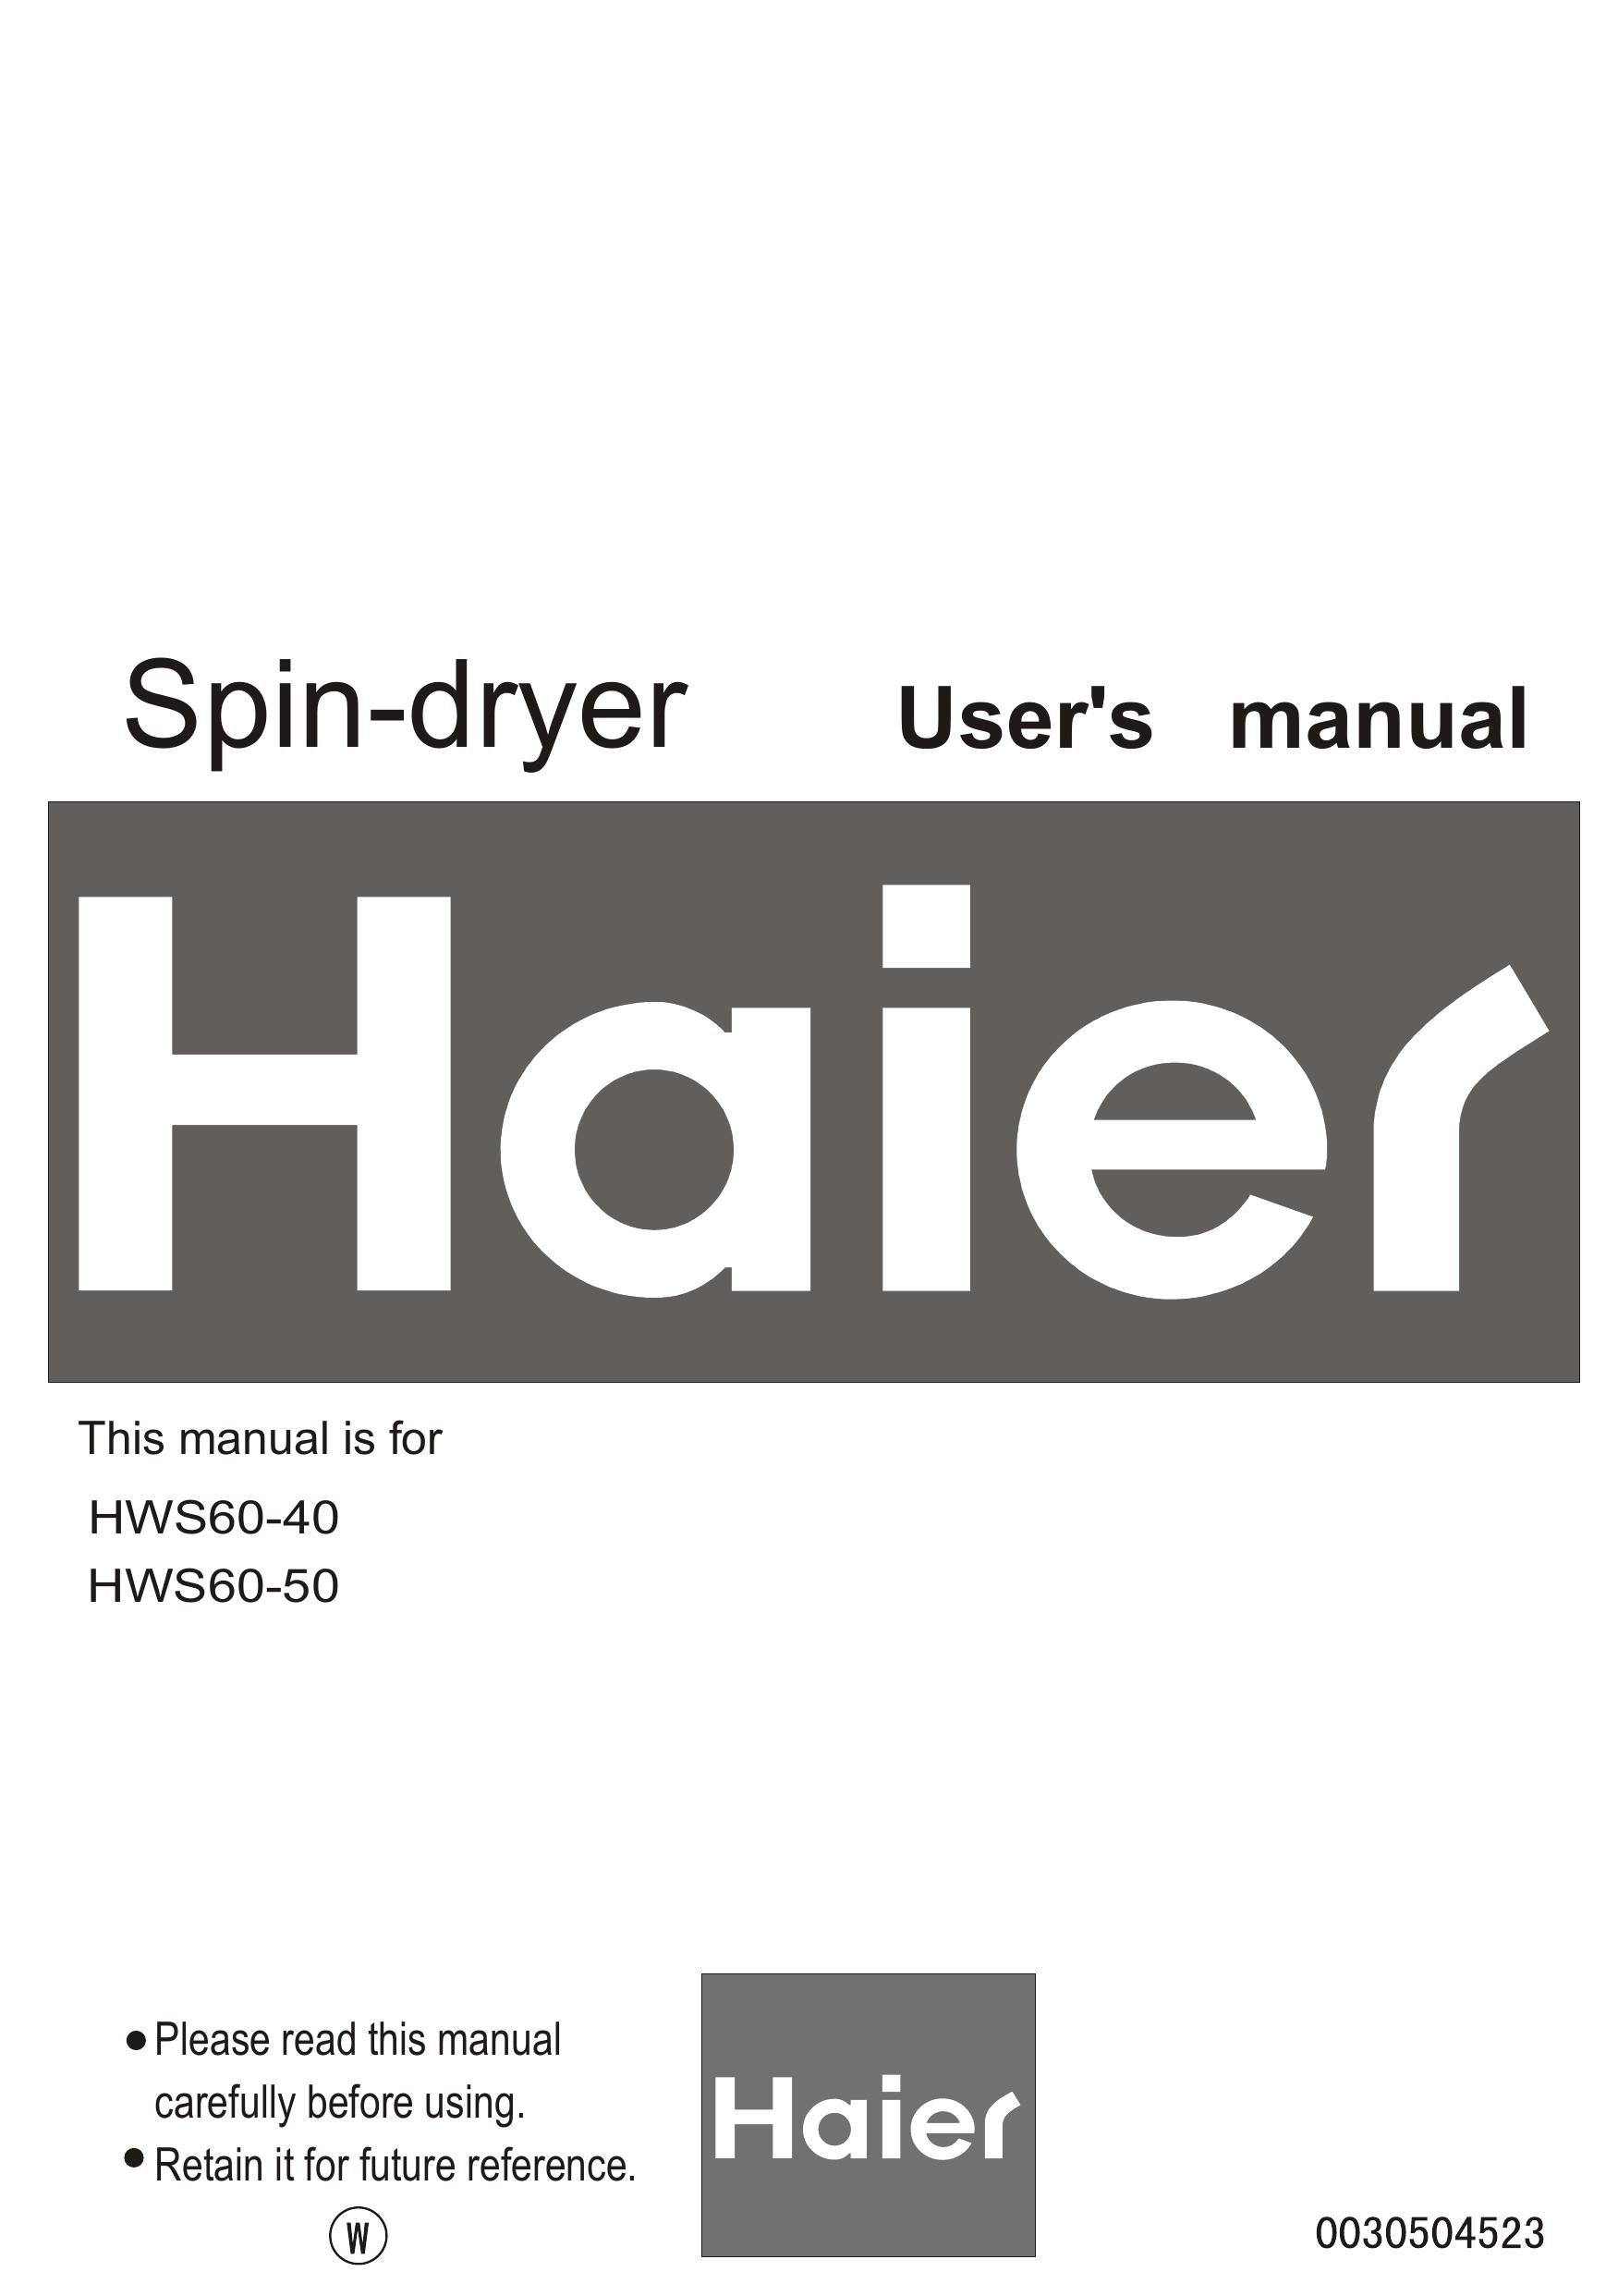 Haier HWS60-40 Clothes Dryer User Manual